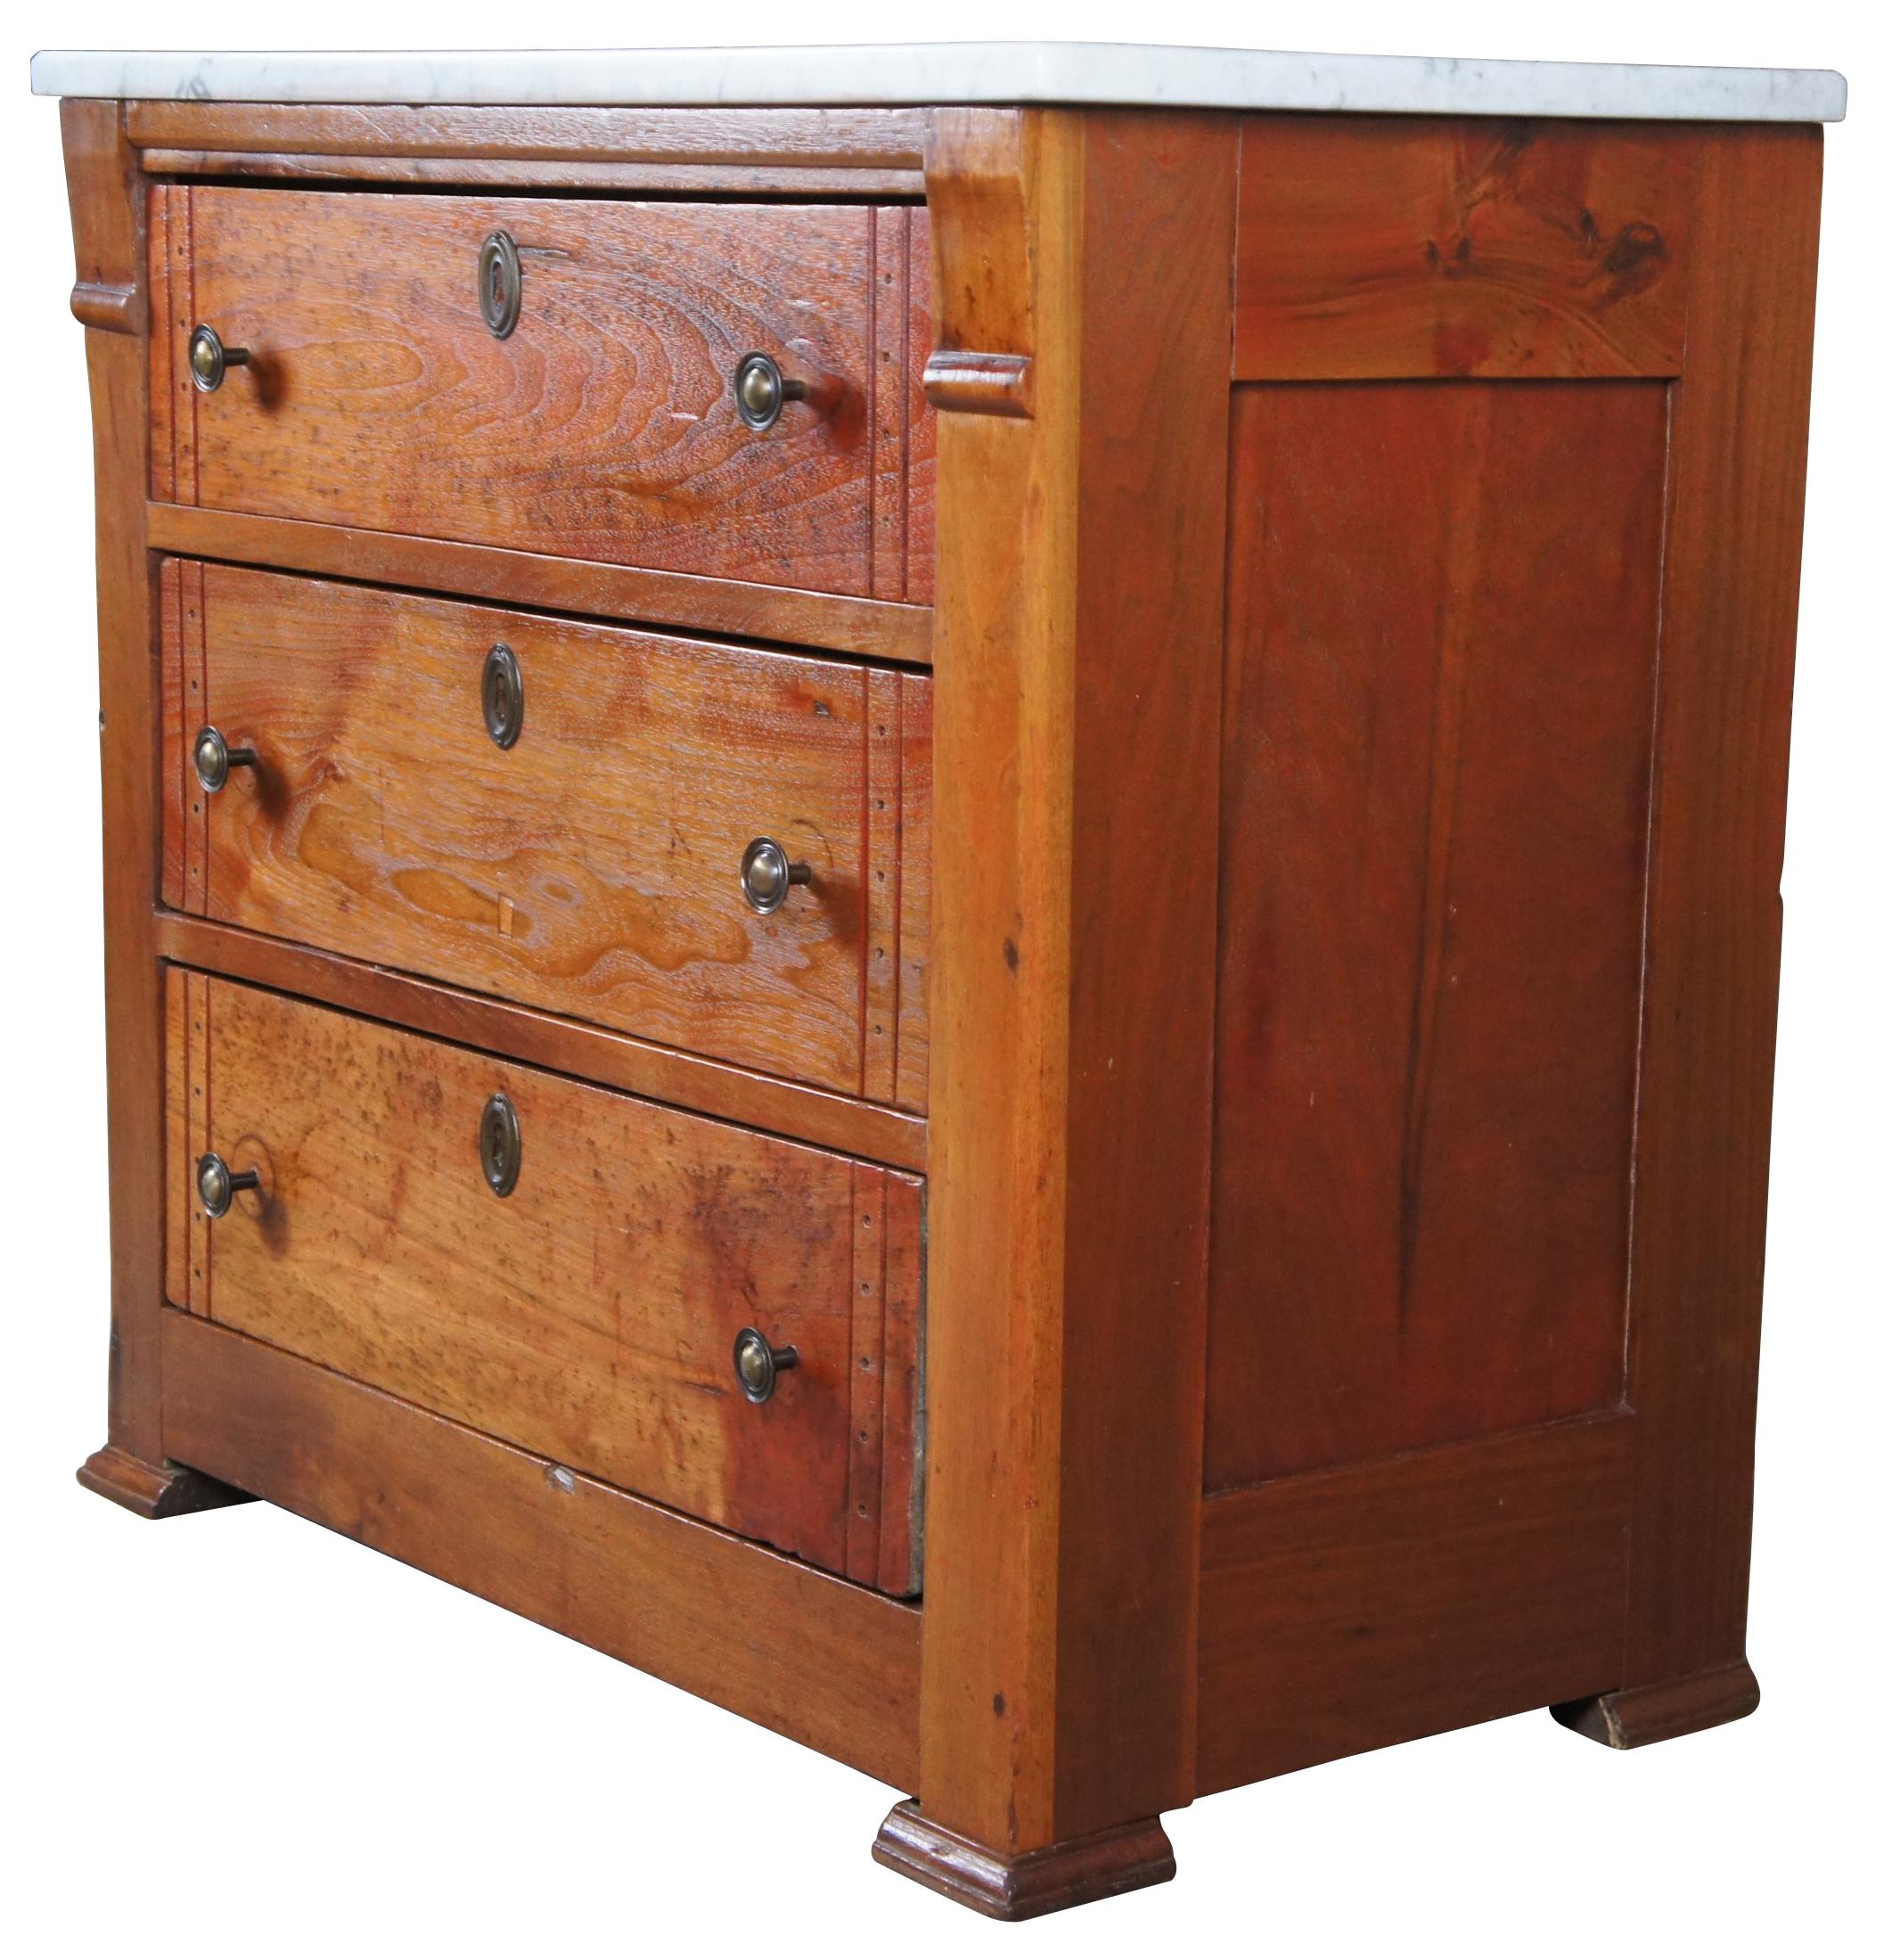 Early 20th century washstand or dresser. Made from walnut with 3 dovetailed drawers and a white marble top. Drawer fronts have a unique vertical punched design.